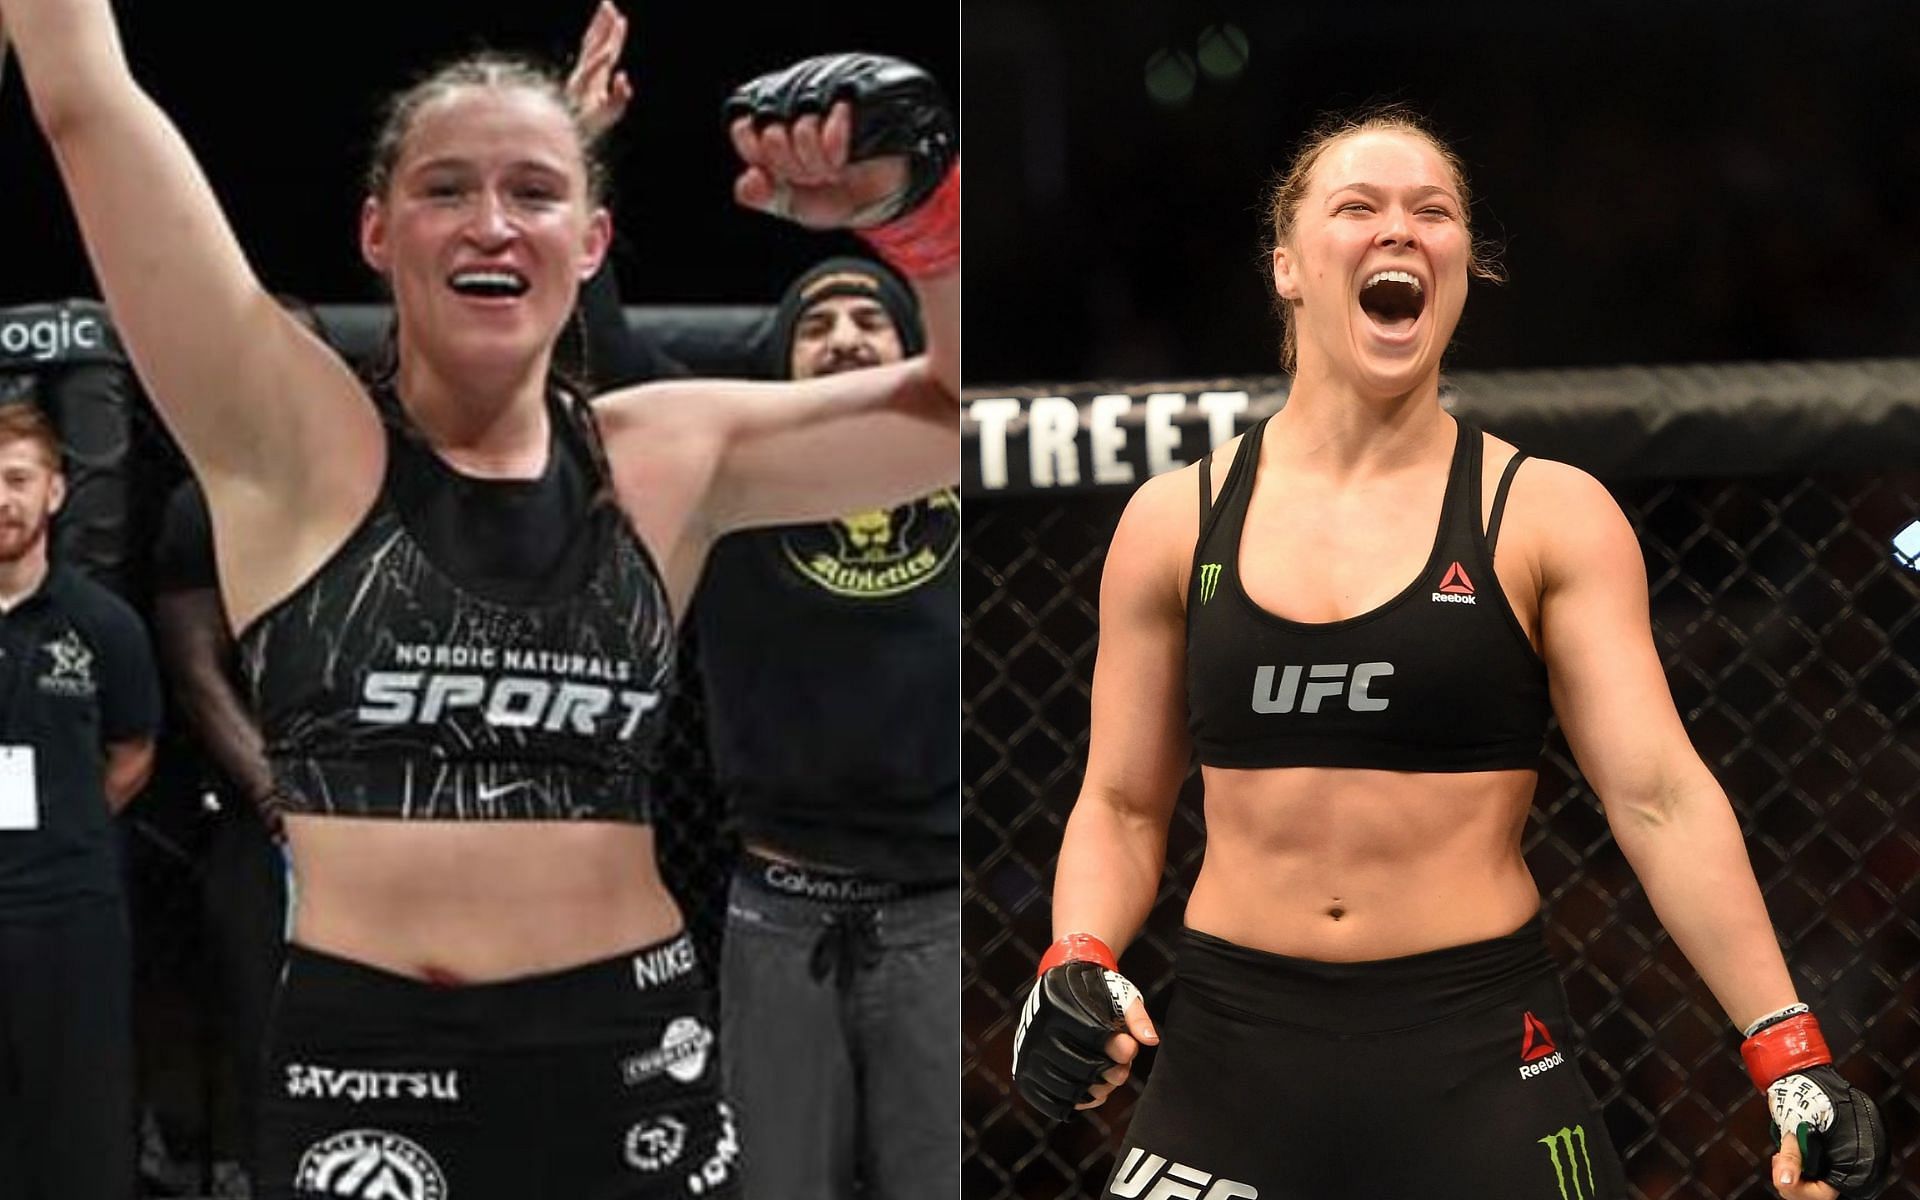 Chelsea Chandler (left) and Ronda Rousey (right) [Image Credit: Getty and @chelseachandler209 on Twitter]